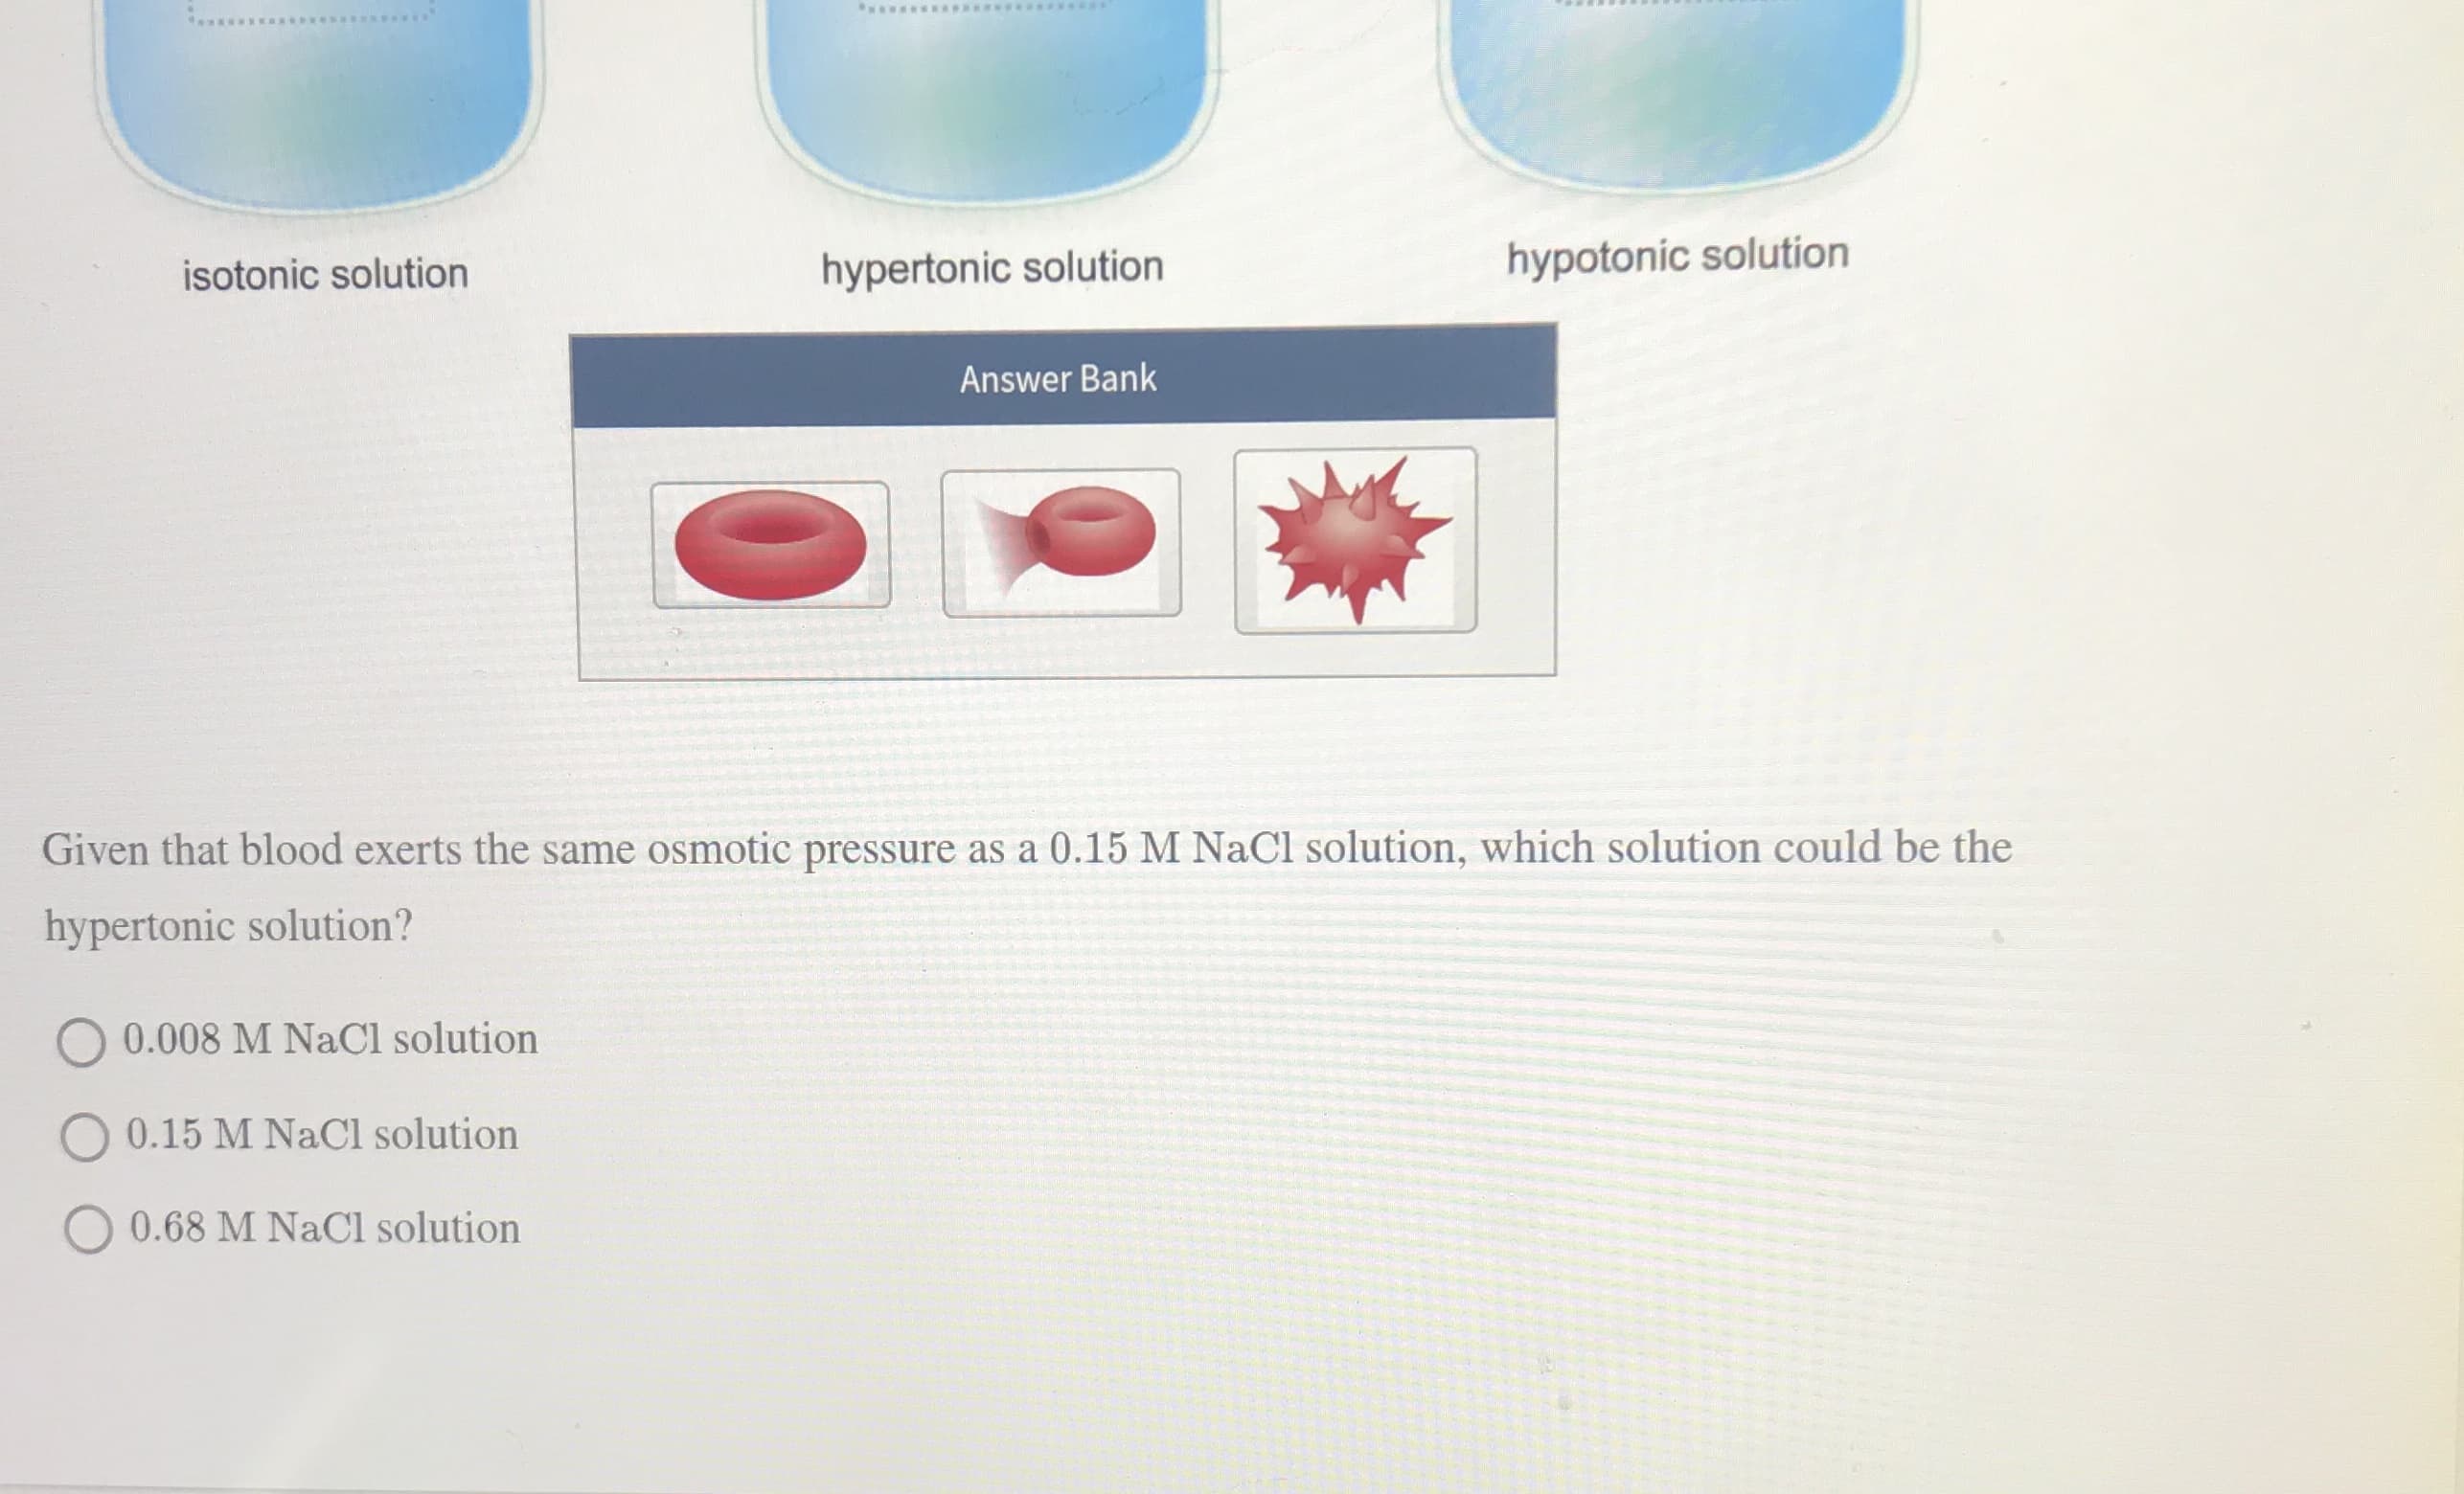 ww*****E*S
isotonic solution
hypertonic solution
hypotonic solution
Answer Bank
Given that blood exerts the same osmotic pressure as a 0.15 M NaCl solution, which solution could be the
hypertonic solution?
0.008 M NaCl solution
O 0.15 M NaCl solution
O 0.68 M NaCl solution
